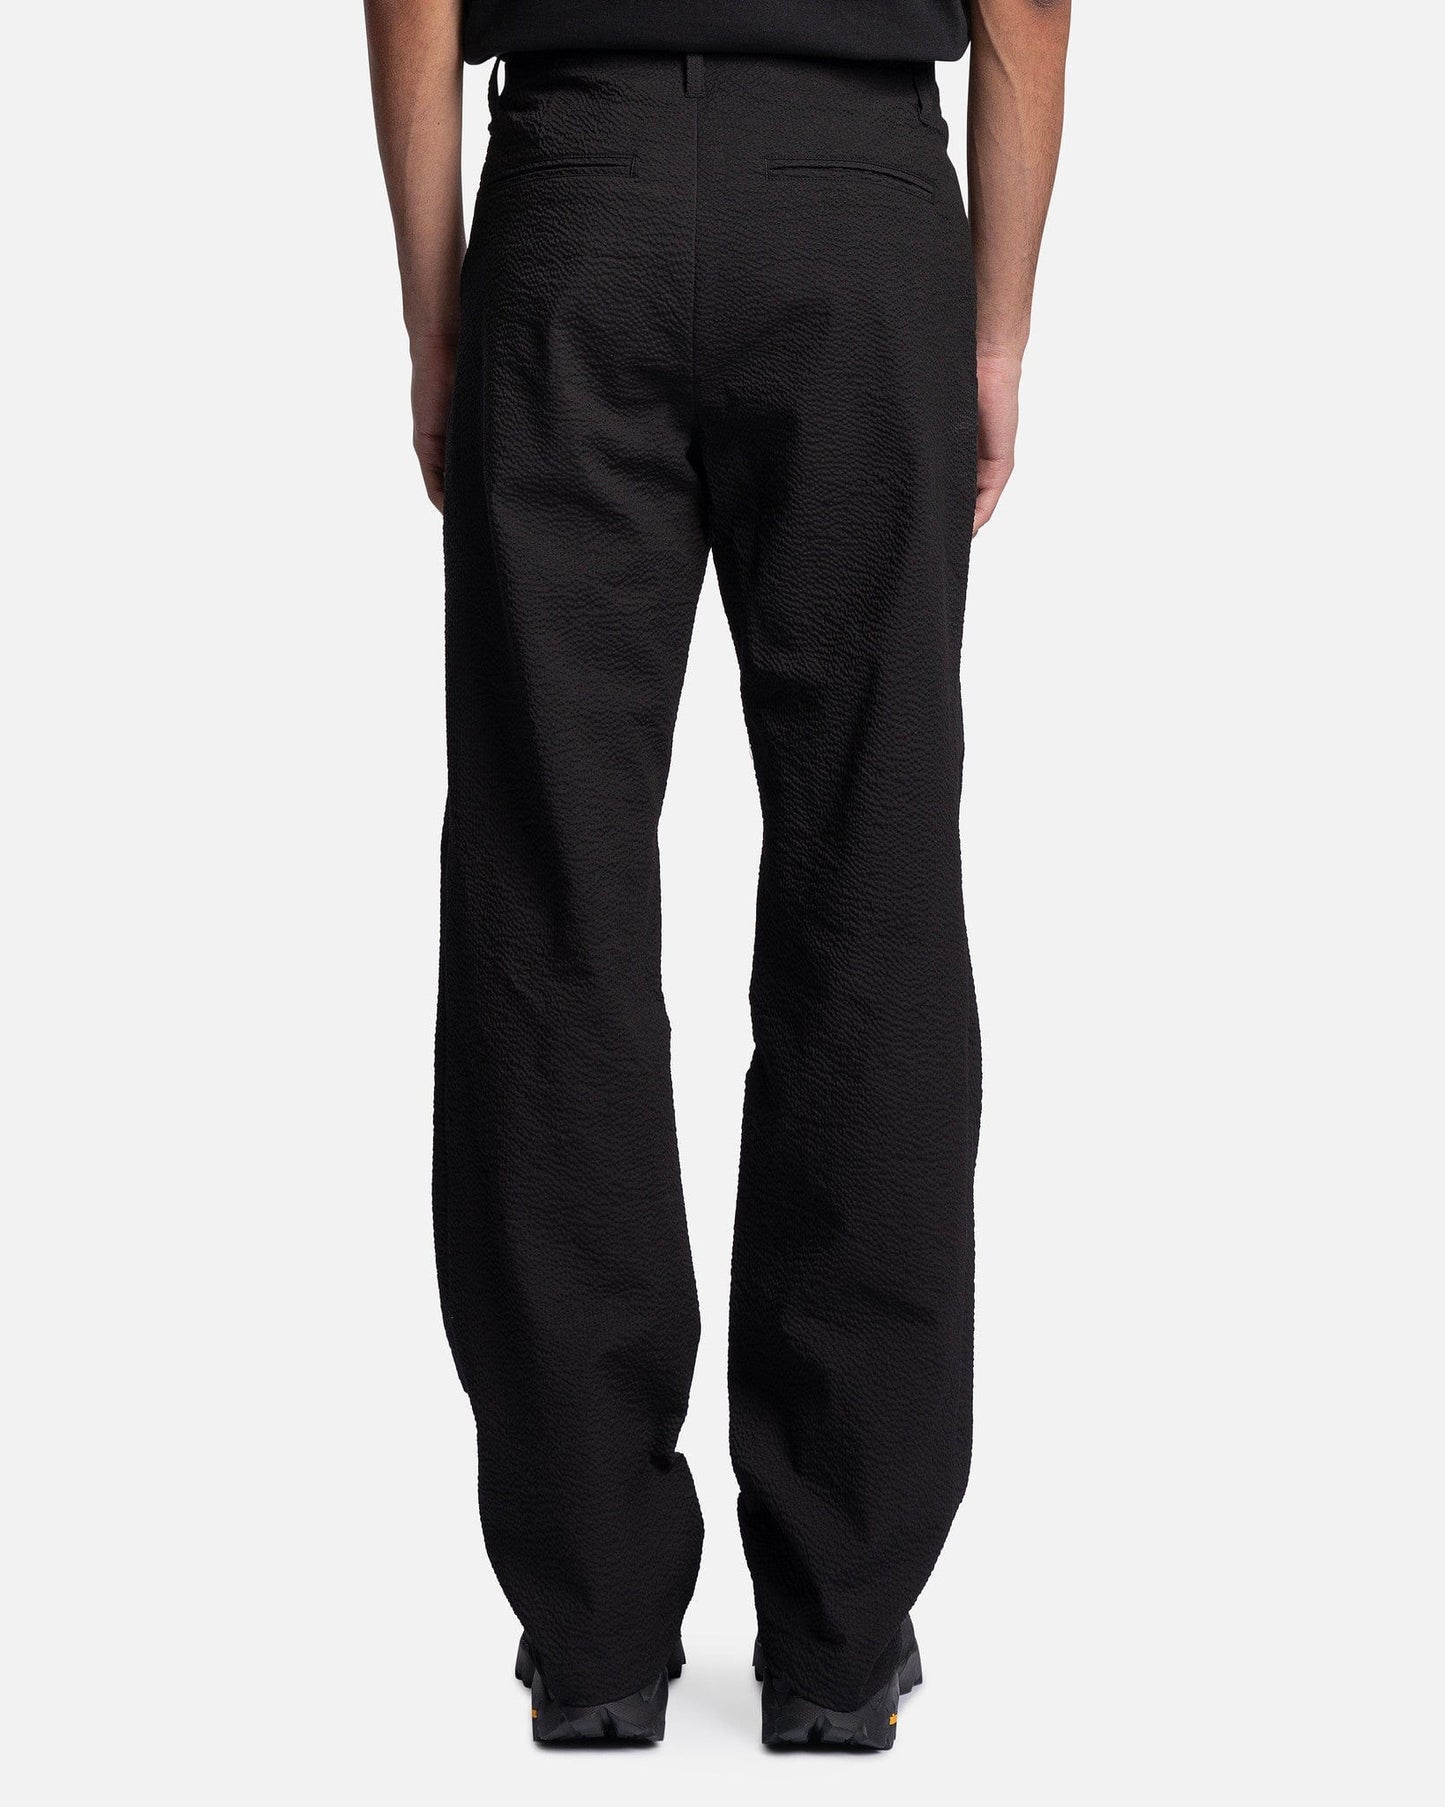 POST ARCHIVE FACTION (P.A.F) Men's Pants 5.0+ Trousers Right in Black